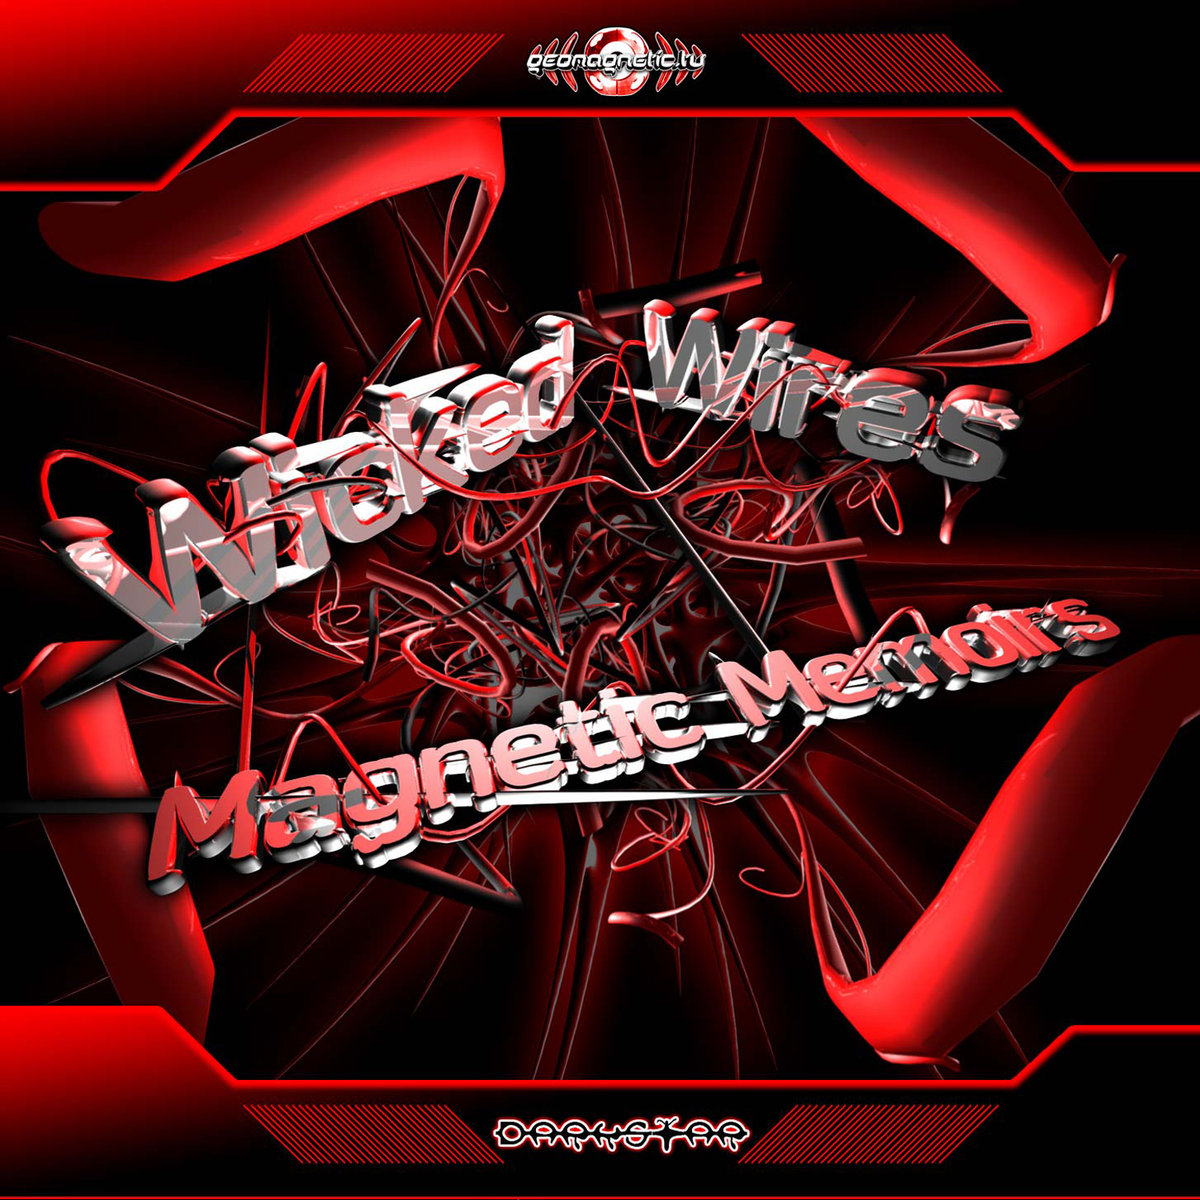 Wicked Wires - Psychosis Temple @ 'Wicked Wires - Magnetic Memoirs' album (electronic, goa)